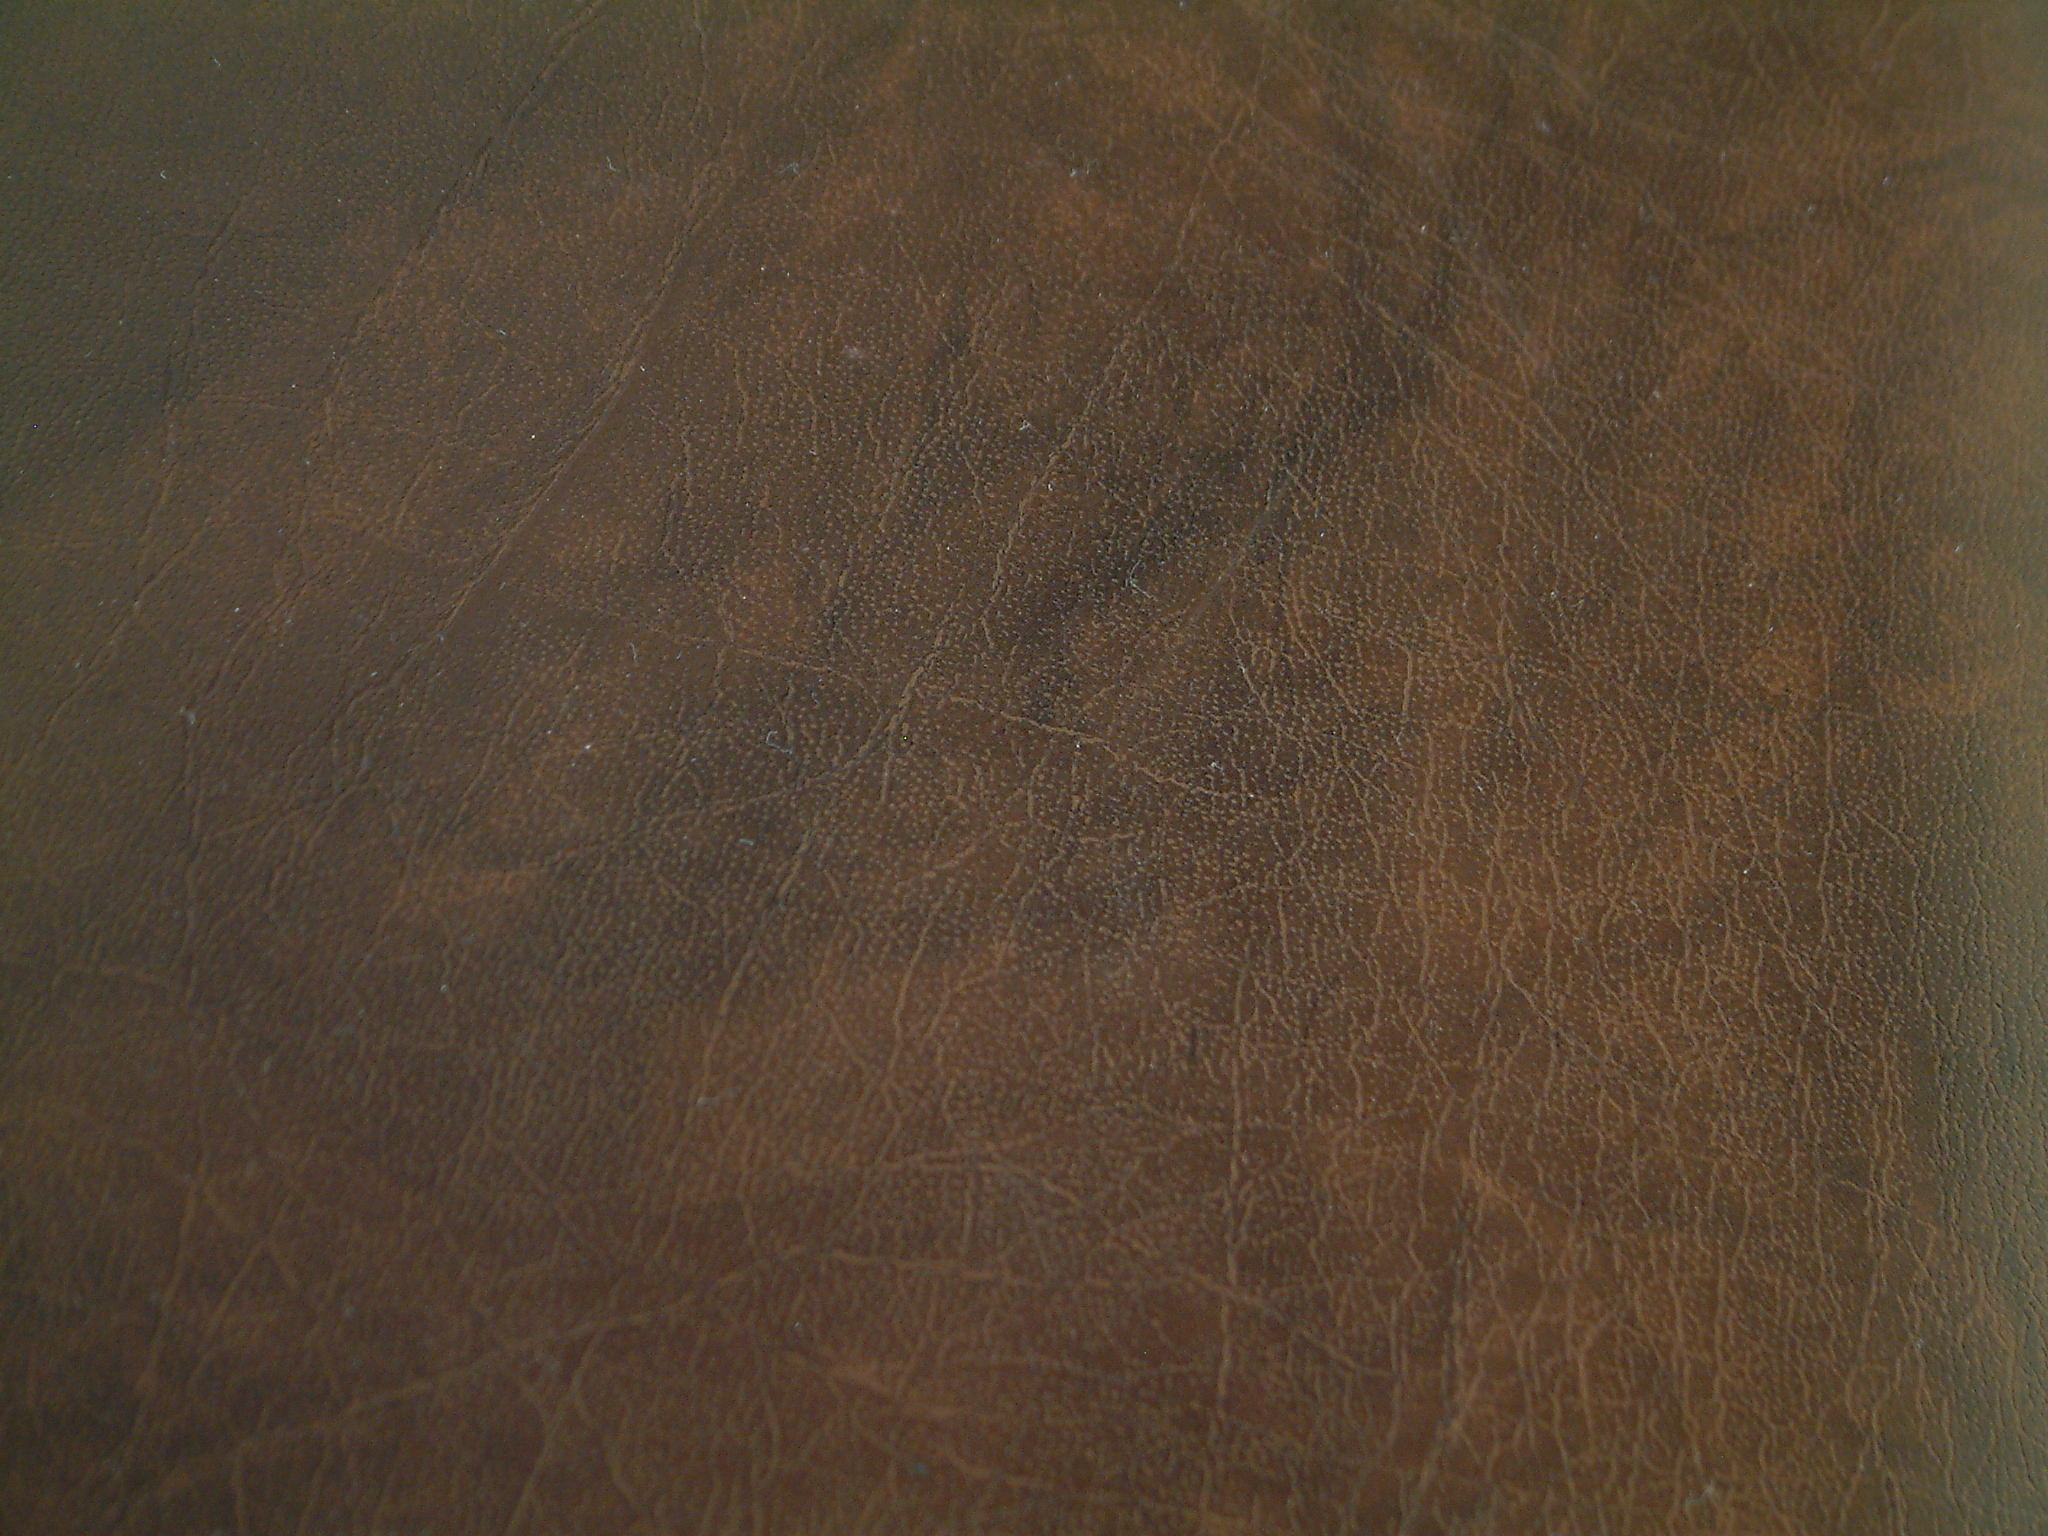 Leather Texture 1